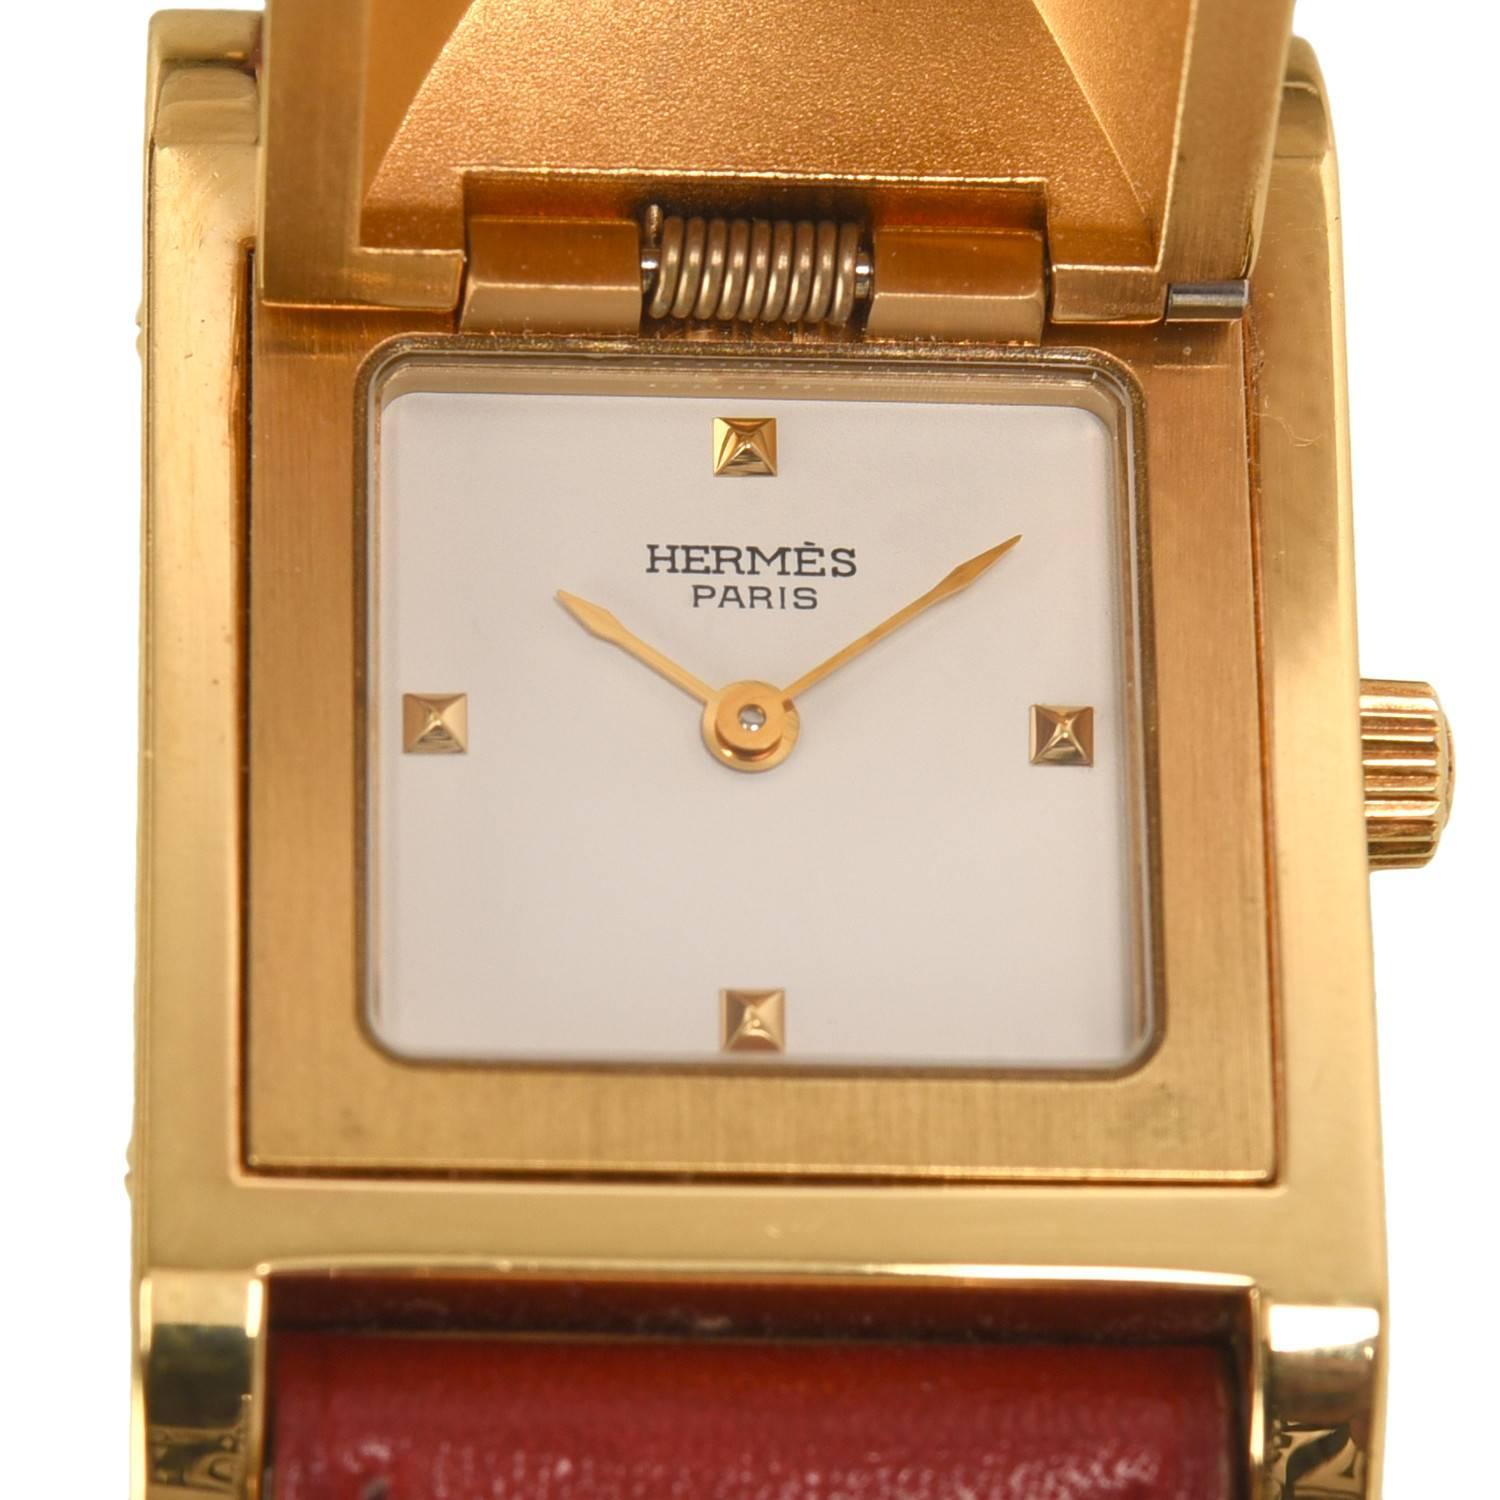 Hermes Medor watch size PM with rouge calfskin leather band.

This watch is made of gold plated stainless steel accented with pyramid studs, the face being hidden under the center stud. The calfskin leather band is adjustable and has a Hermes